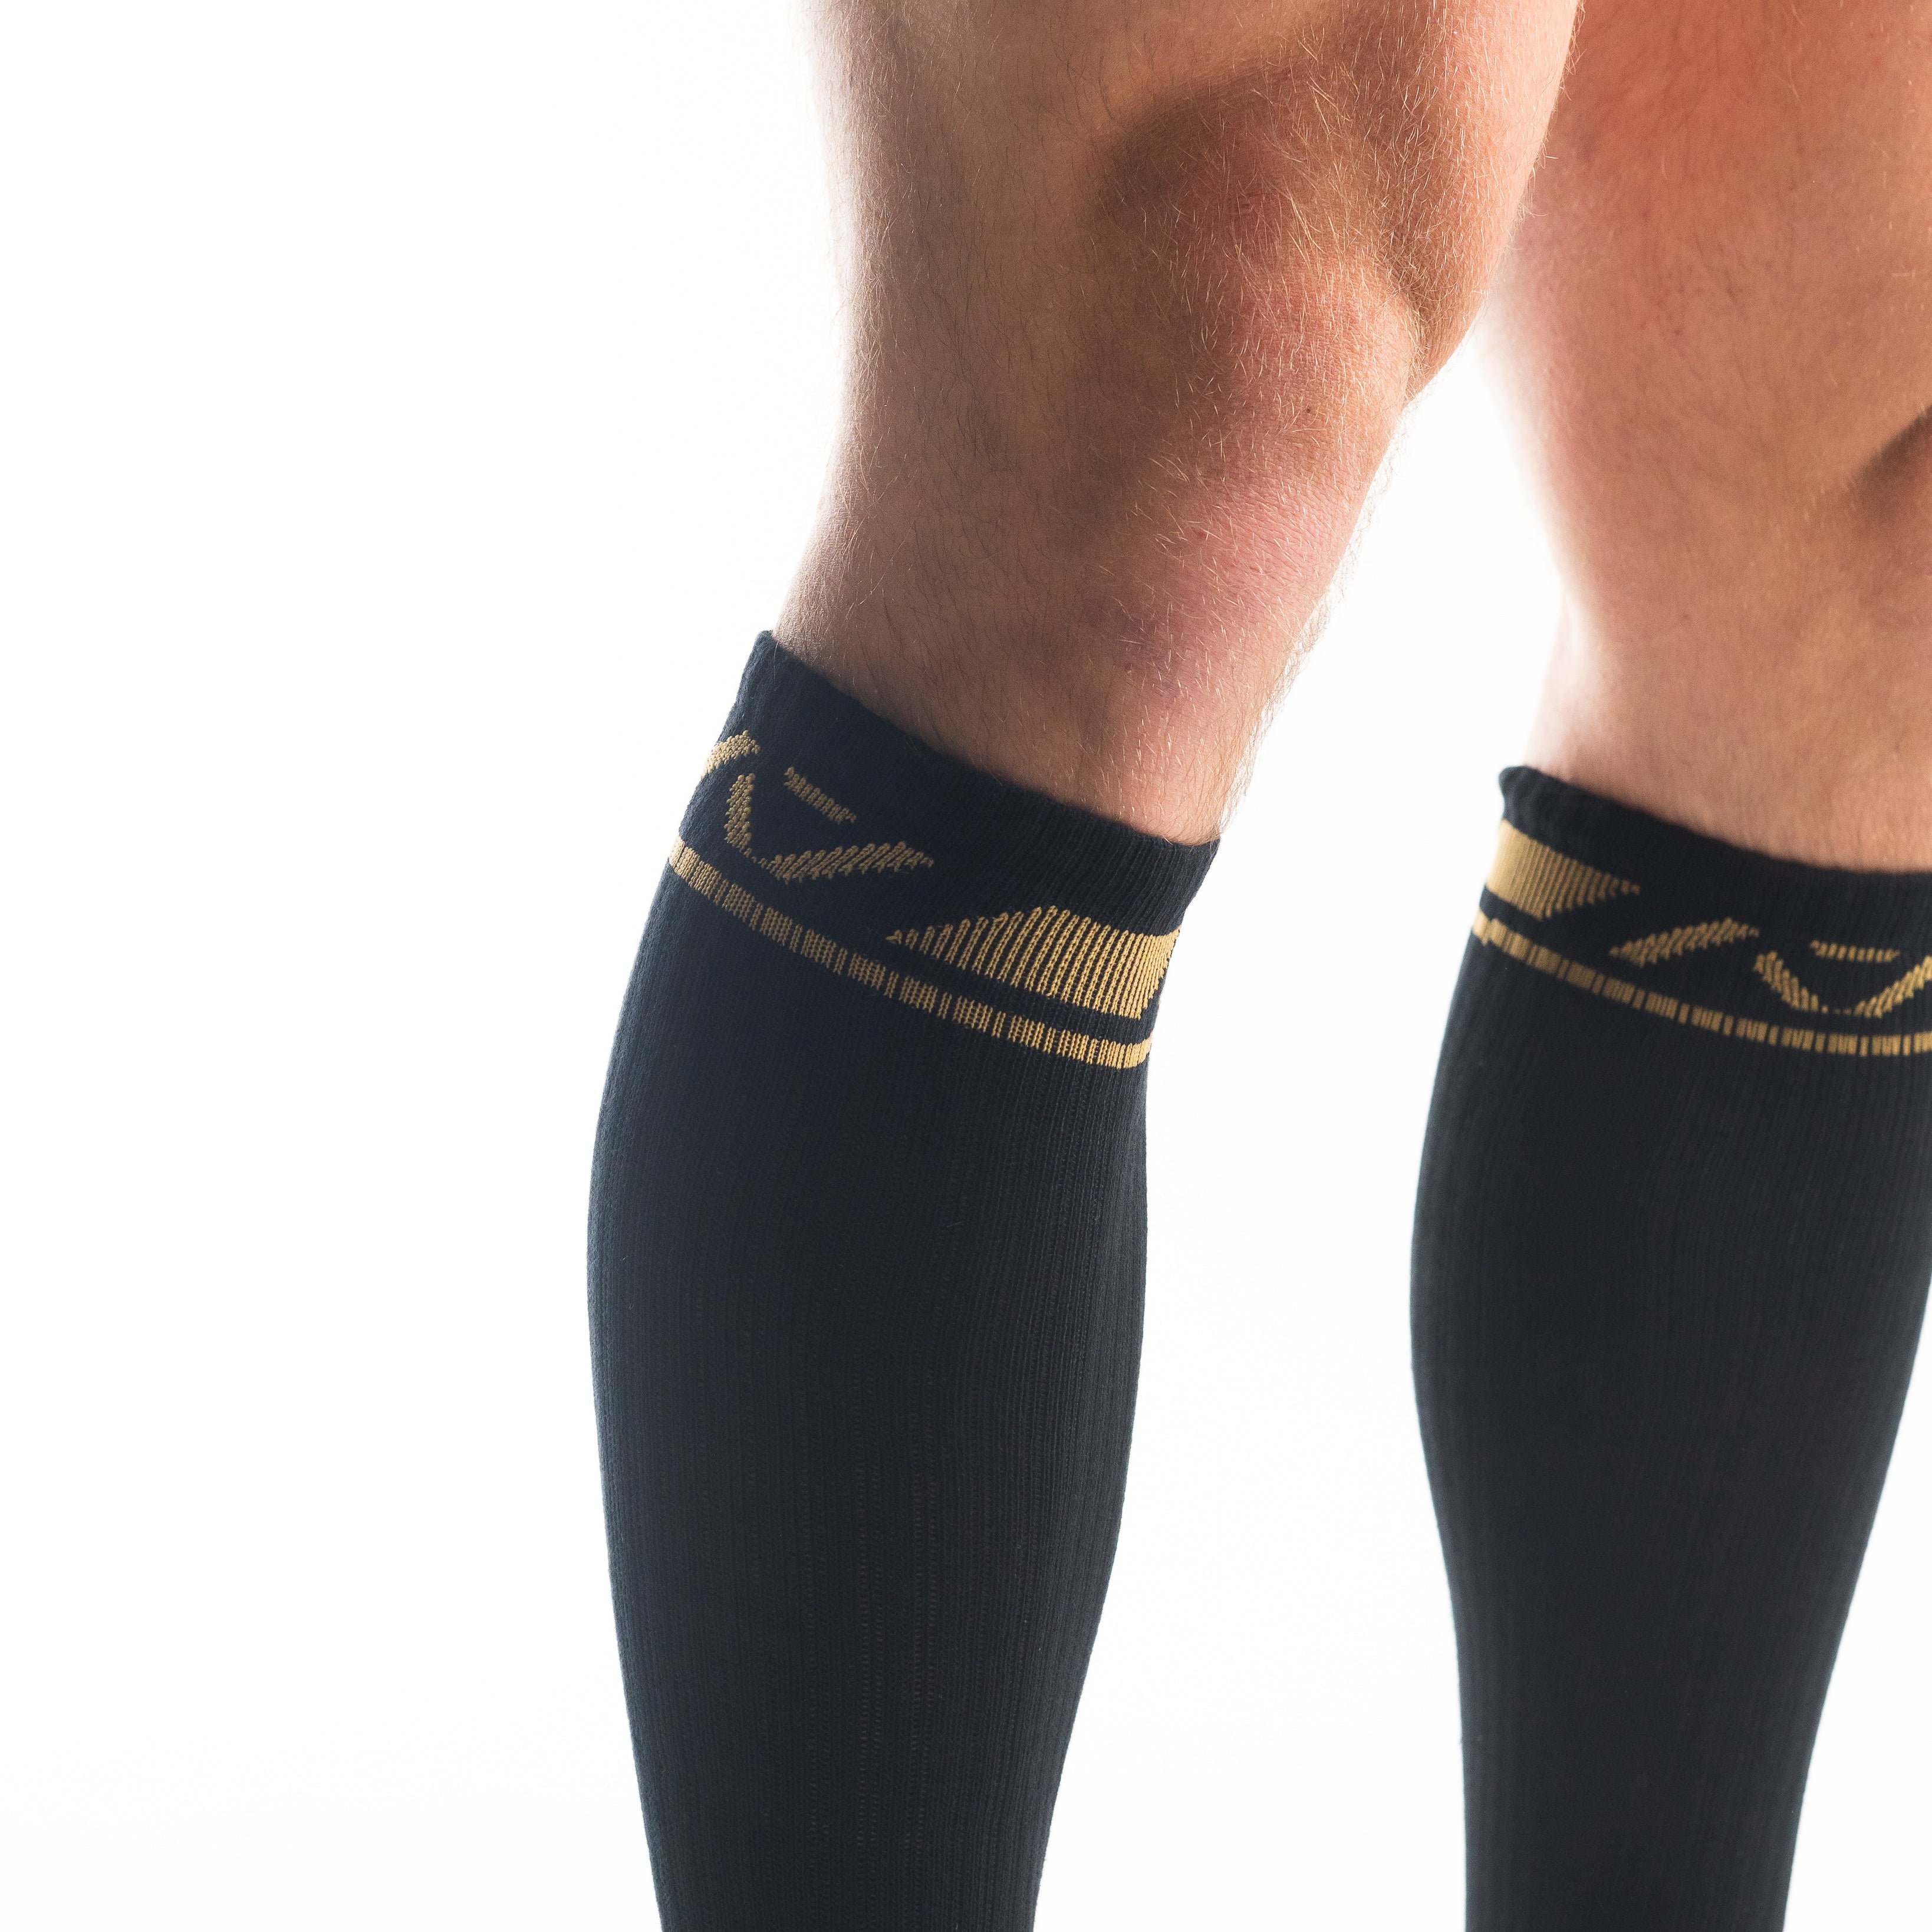 A7 Gold Standard Deadlift socks are designed specifically for pulls and keep your shins protected from scrapes. A7 deadlift socks are a perfect pair to wear in training or powerlifting competition. The IPF Approved Kit includes Powerlifting Singlet, A7 Meet Shirt, A7 Zebra Wrist Wraps, A7 Deadlift Socks, Hourglass Knee Sleeves (Stiff Knee Sleeves and Rigor Mortis Knee Sleeves). All A7 Powerlifting Equipment shipping to UK, Norway, Switzerland and Iceland.